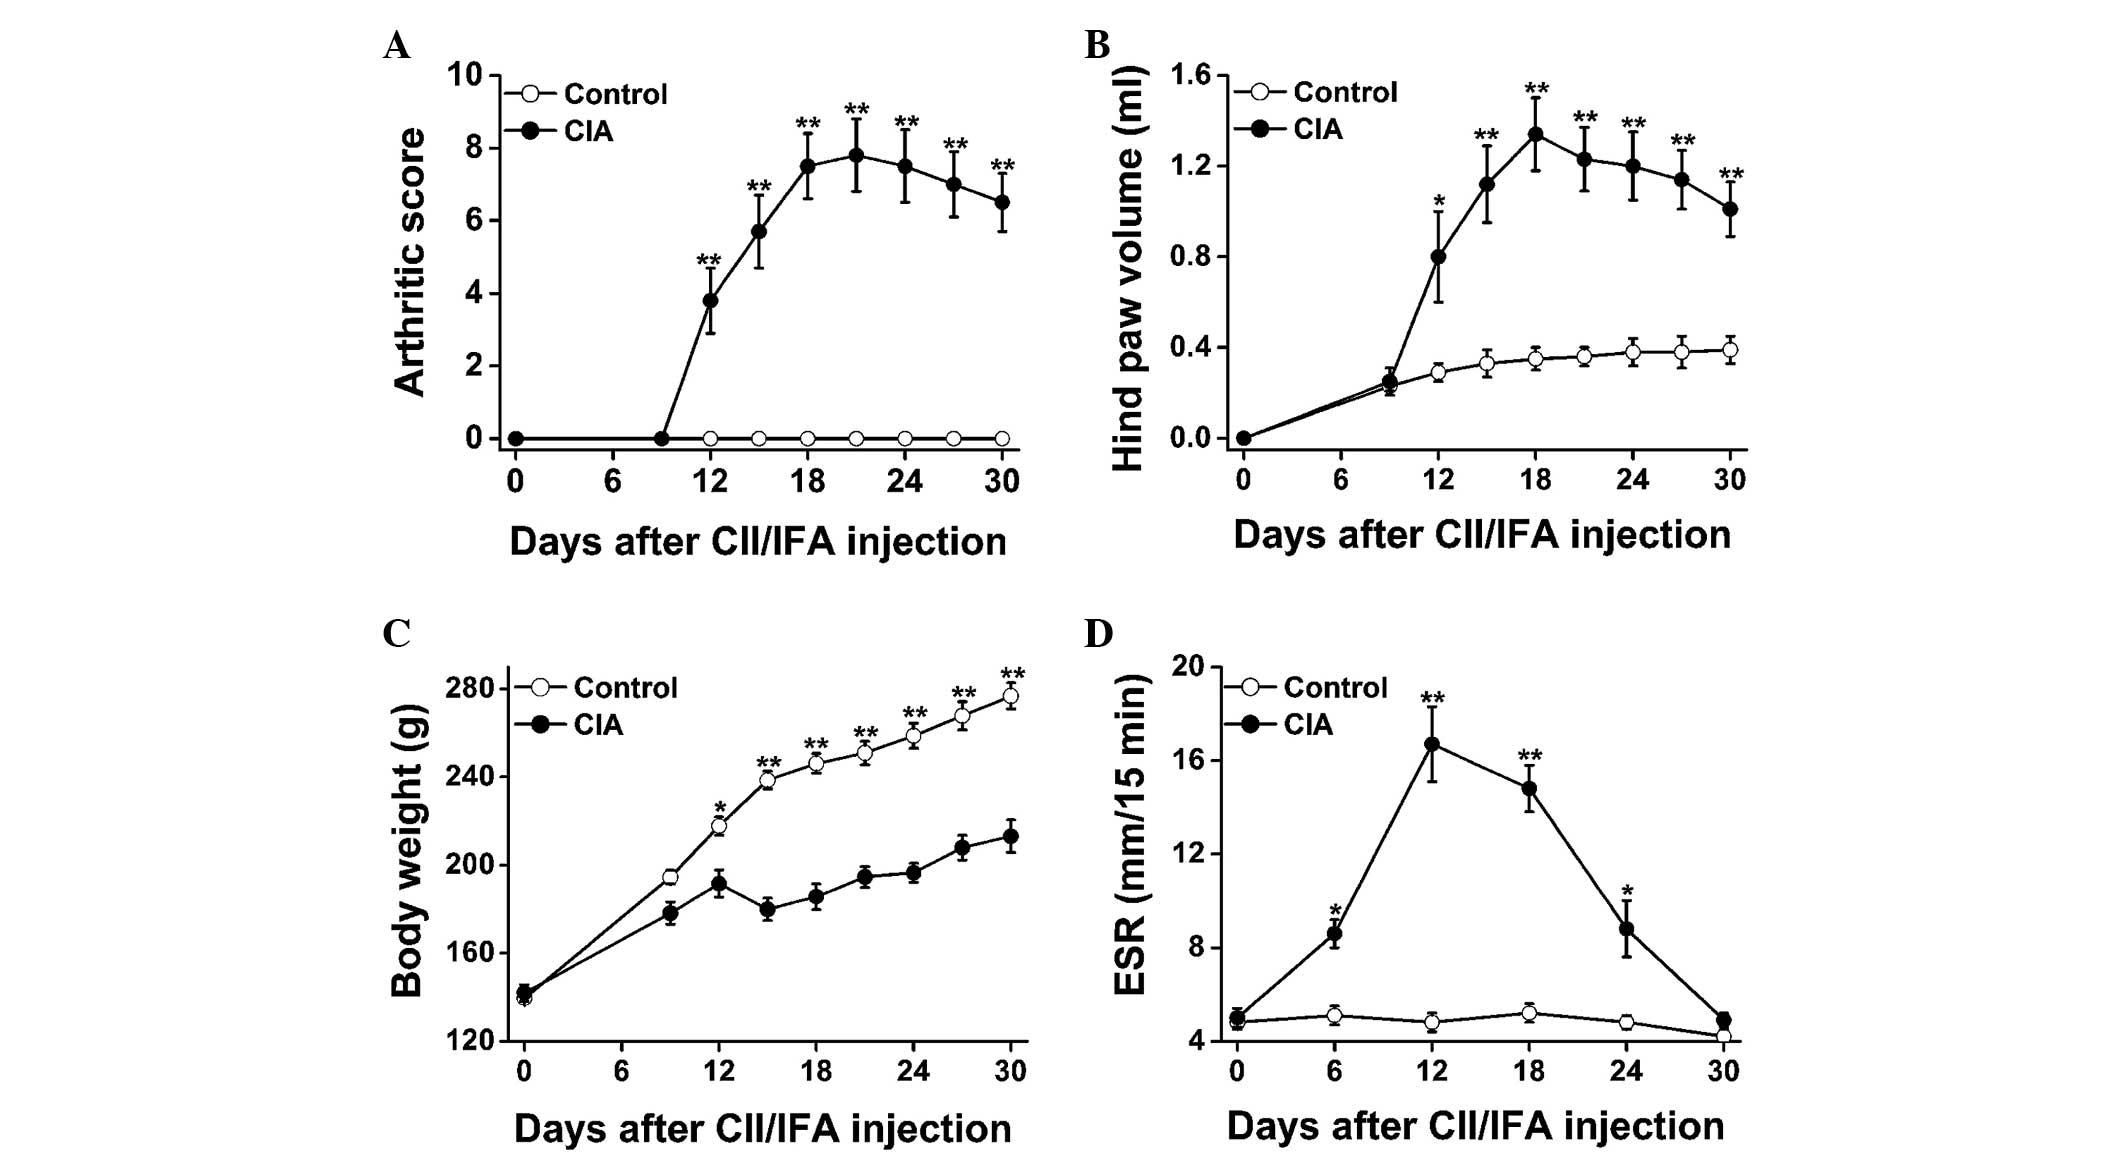 Clinical progression of CIA in female Wistar rats during a 30-day course